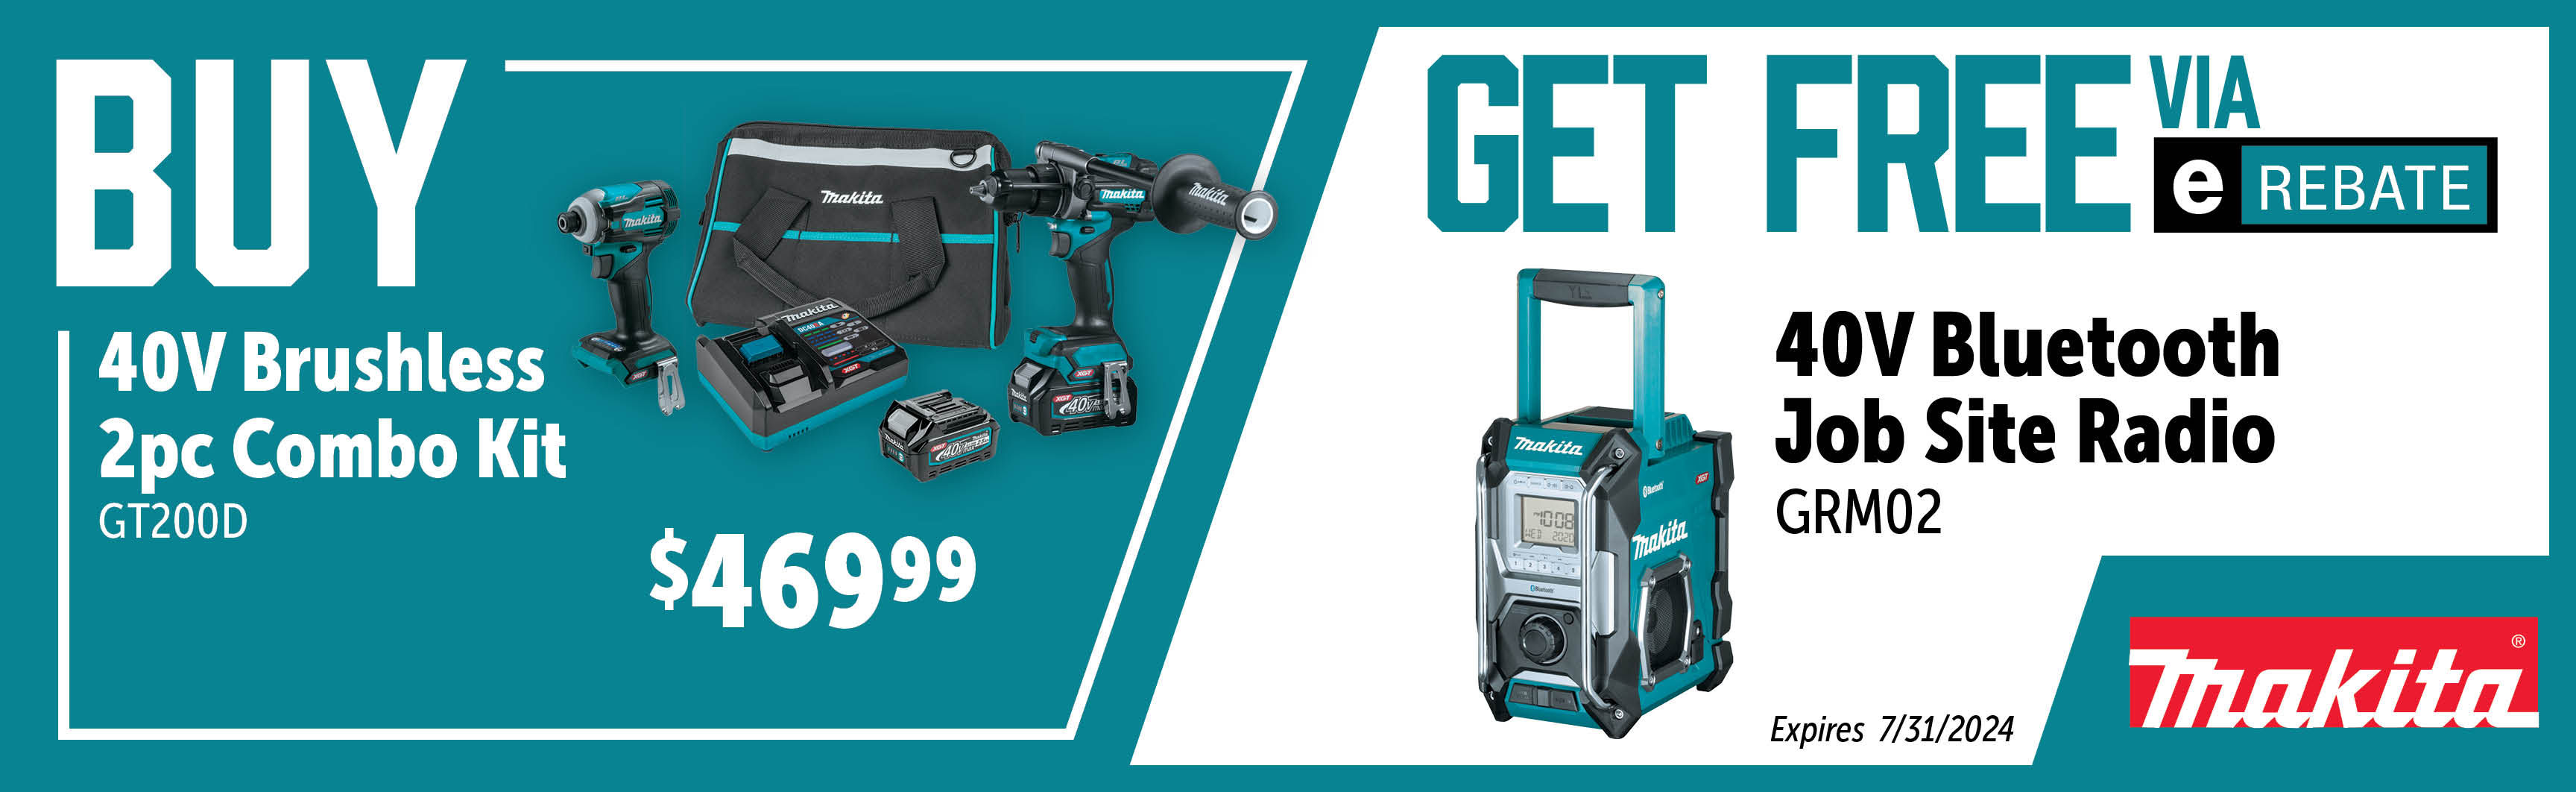 Makita May - July: Buy a GT200D and Get a Free GRM02 Via E-Rebate